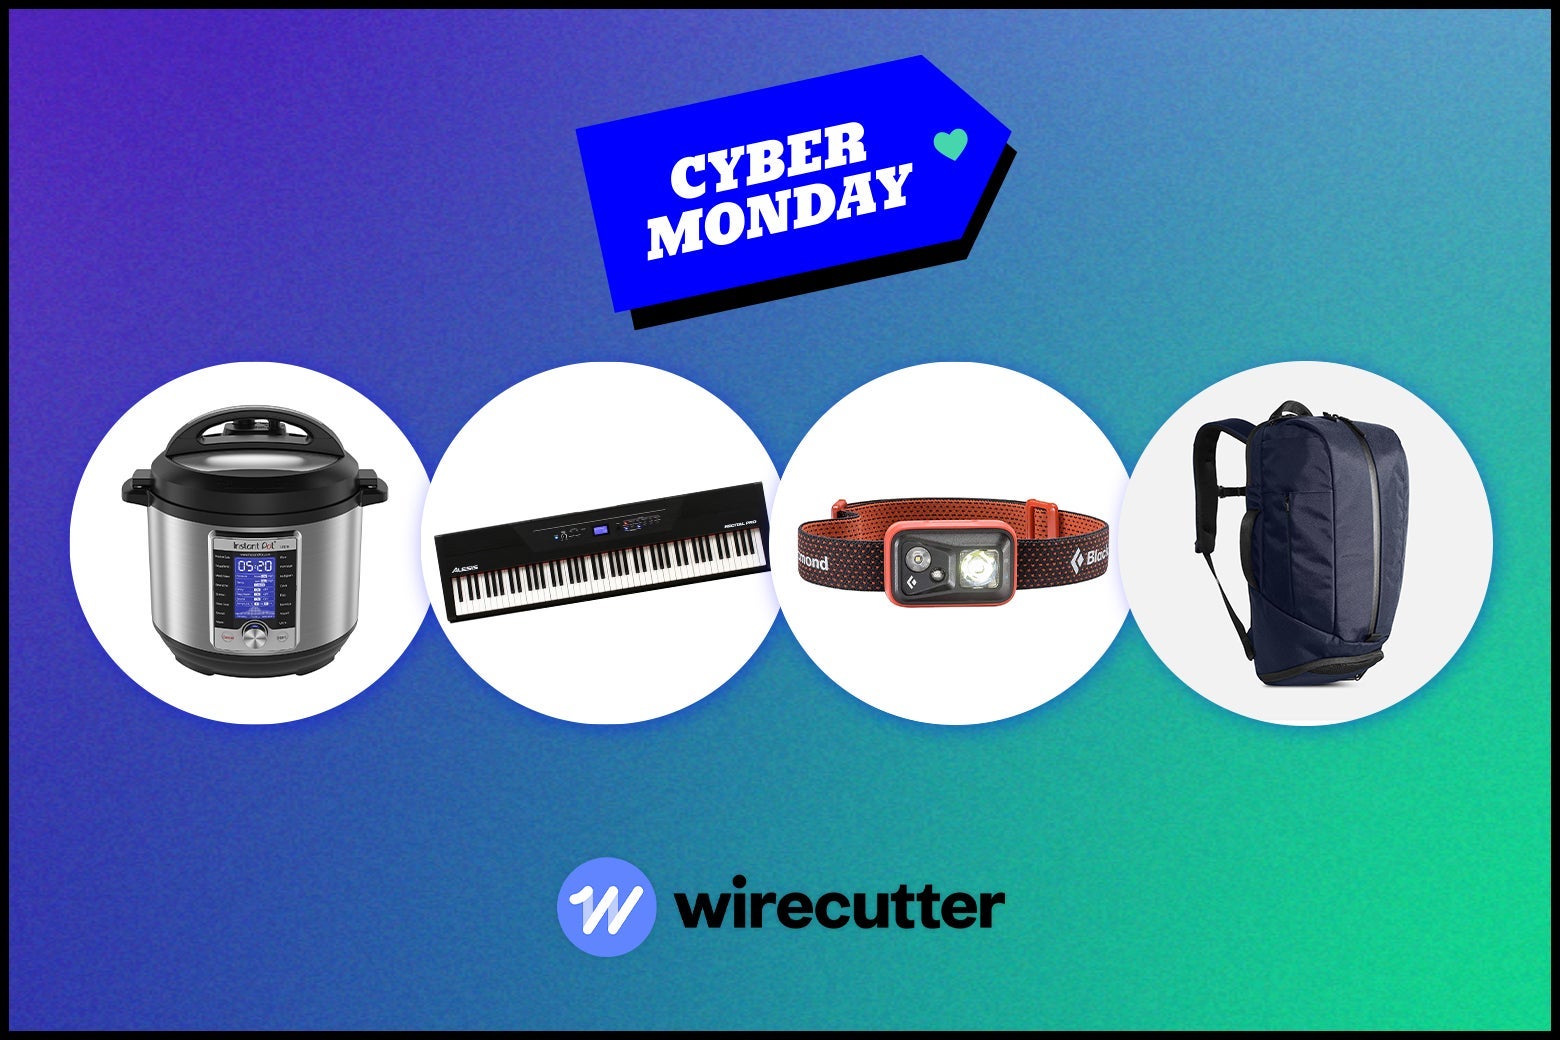 Best early Cyber Monday deals 2019.